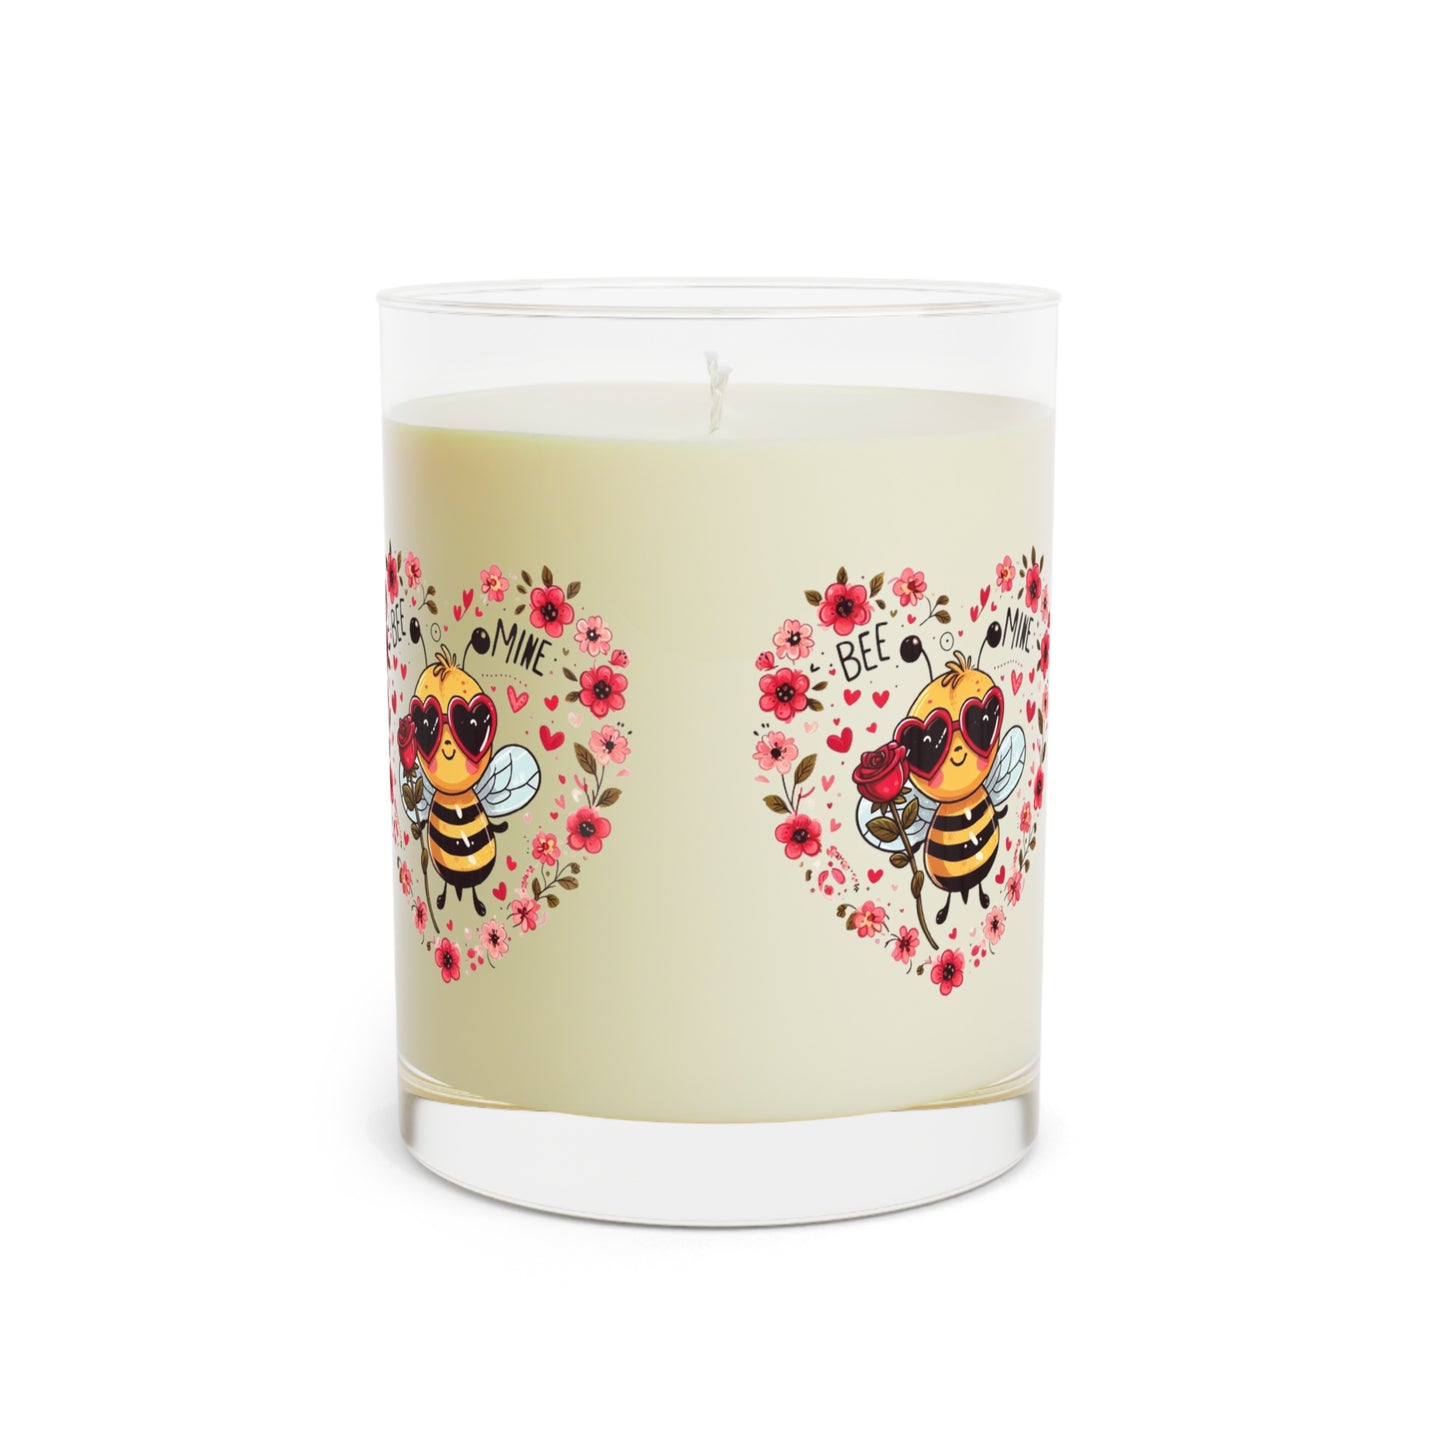 Whimsical Bee Love: Heartfelt Valentines Design with Floral Accents and Heart Sunglasses - Scented Candle - Full Glass, 11oz